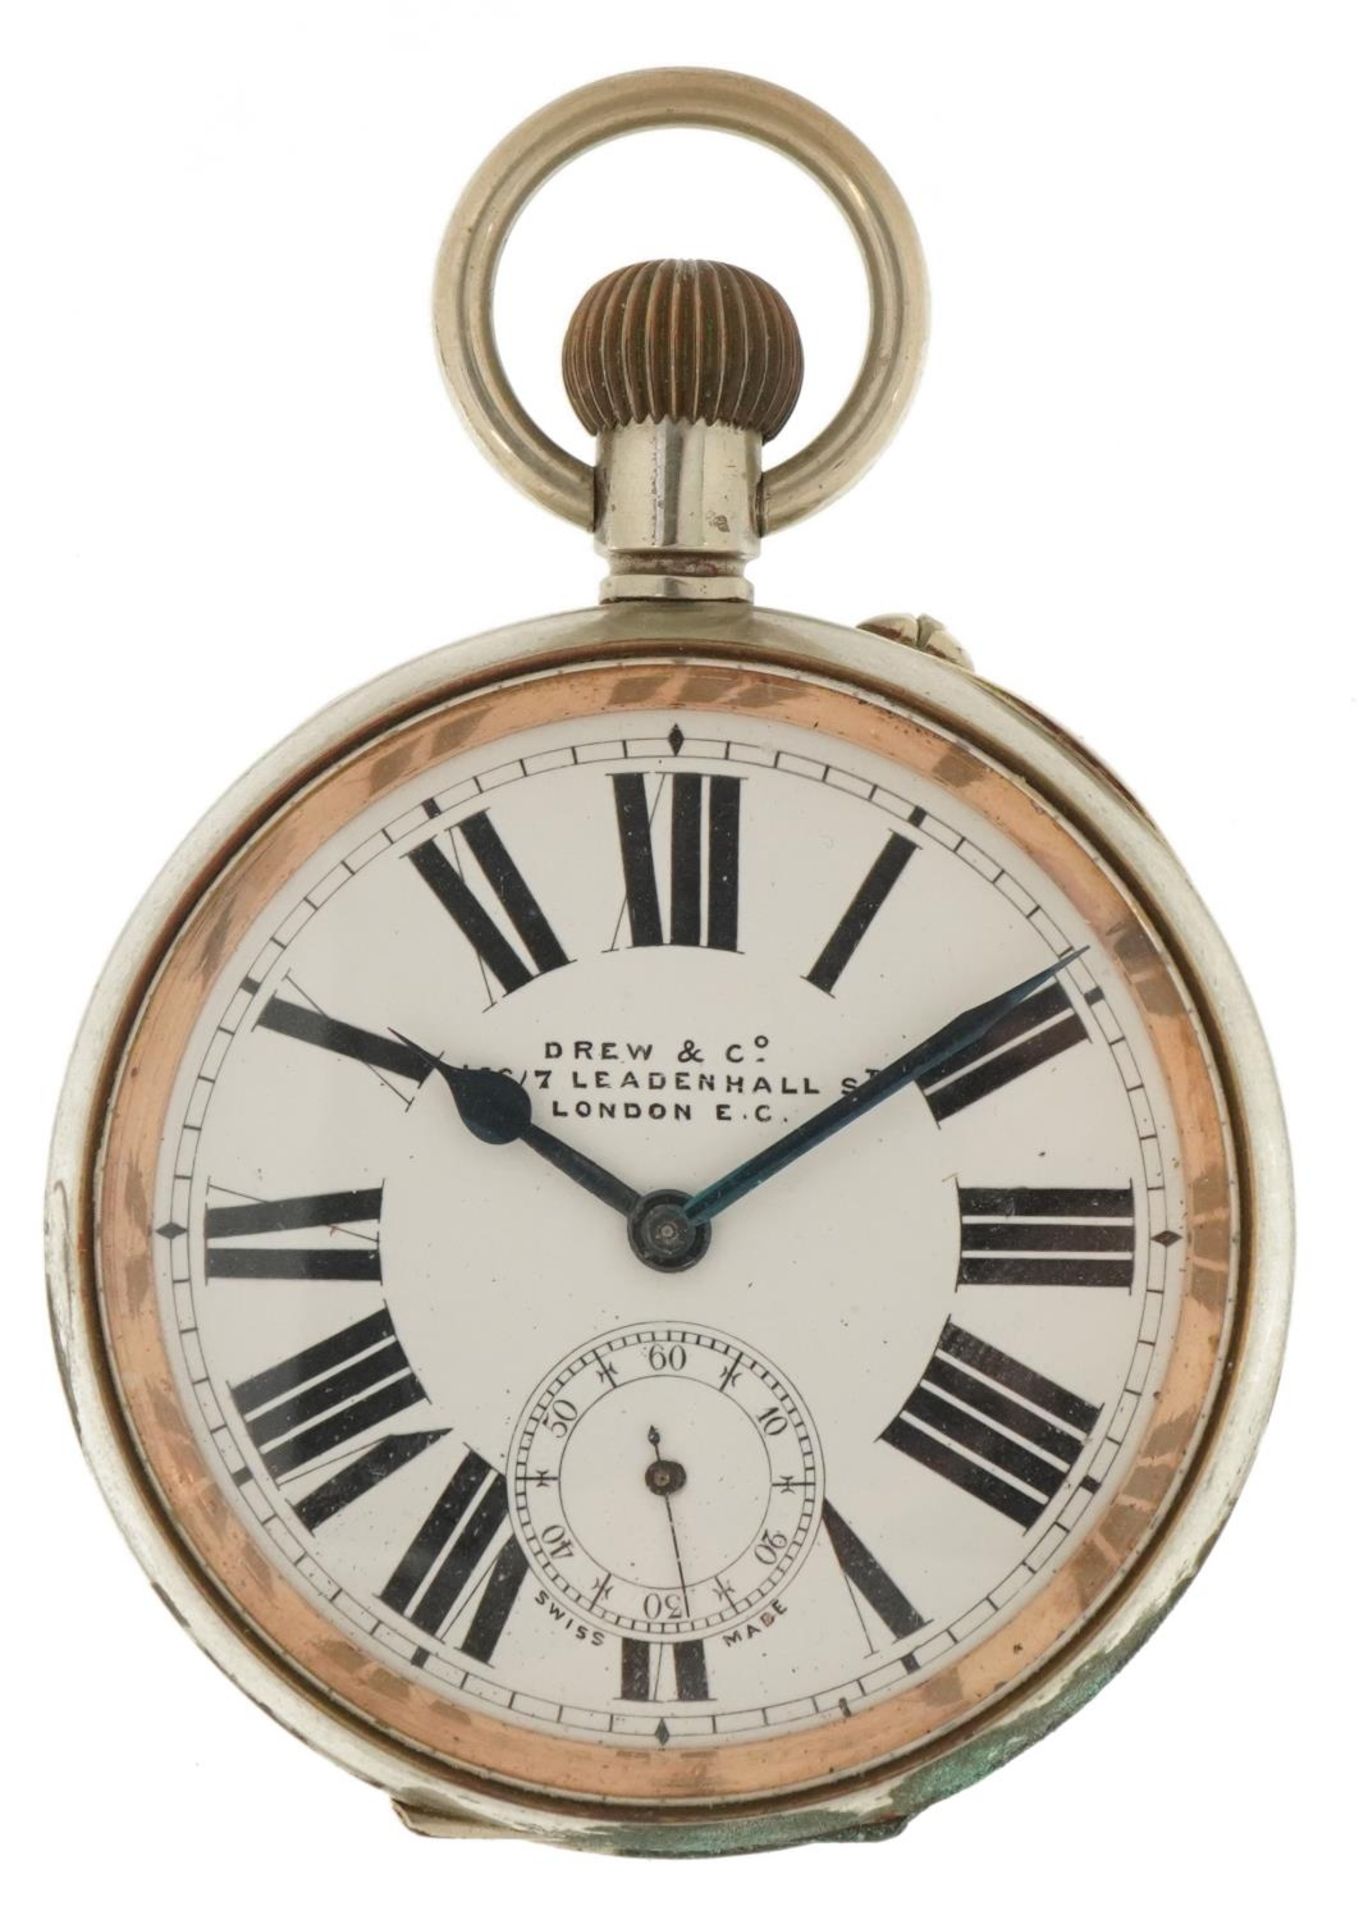 Drew & Co, white metal Goliath pocket watch, the enamelled dial having Roman numerals, 67mm in